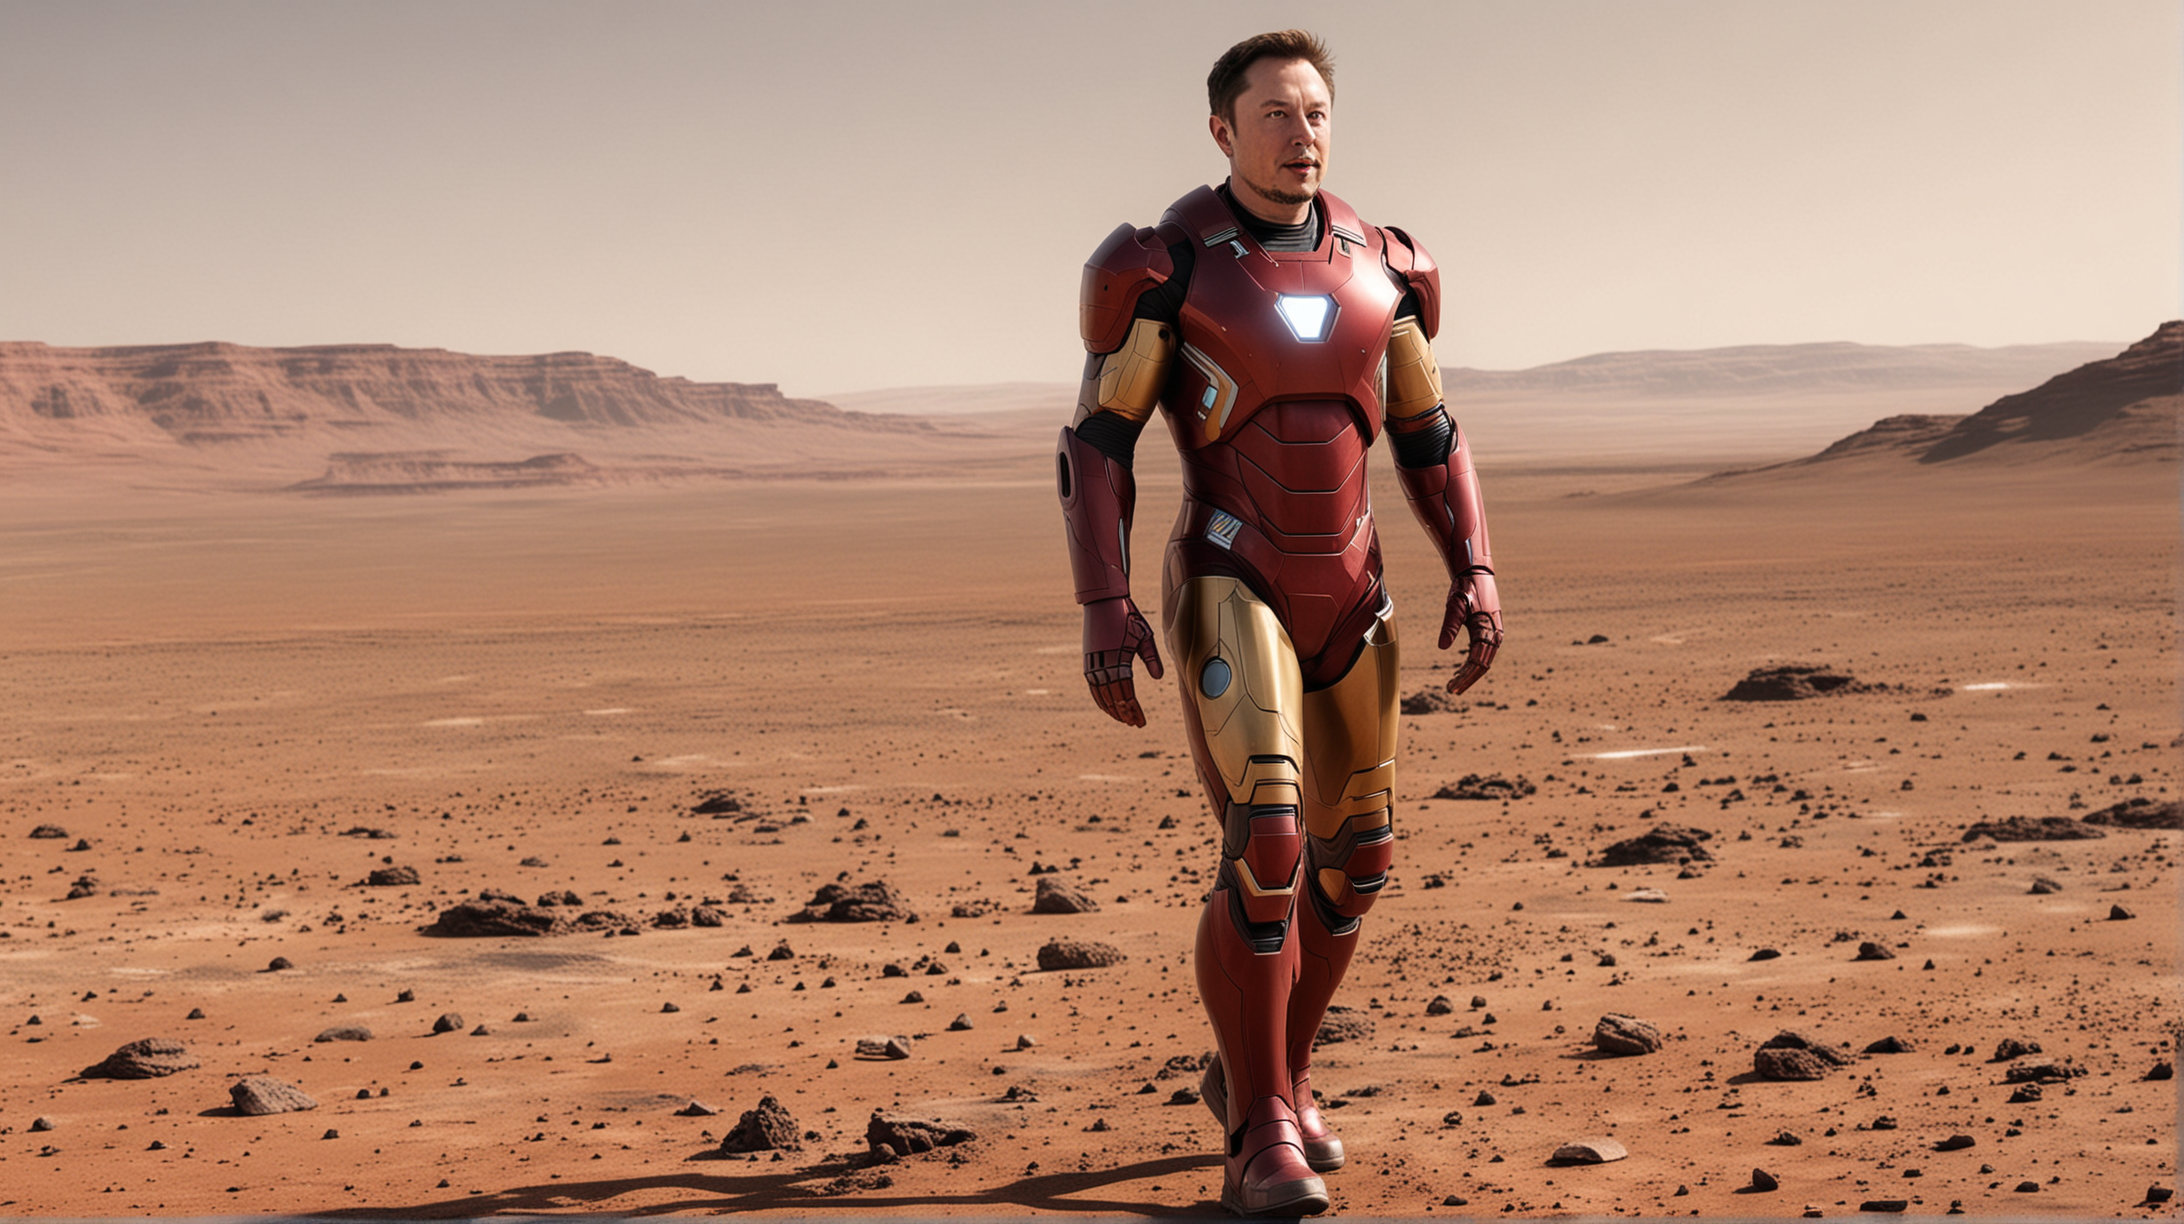 Elon Musk as Iron Man Landing on Mars with Varied Color Suit